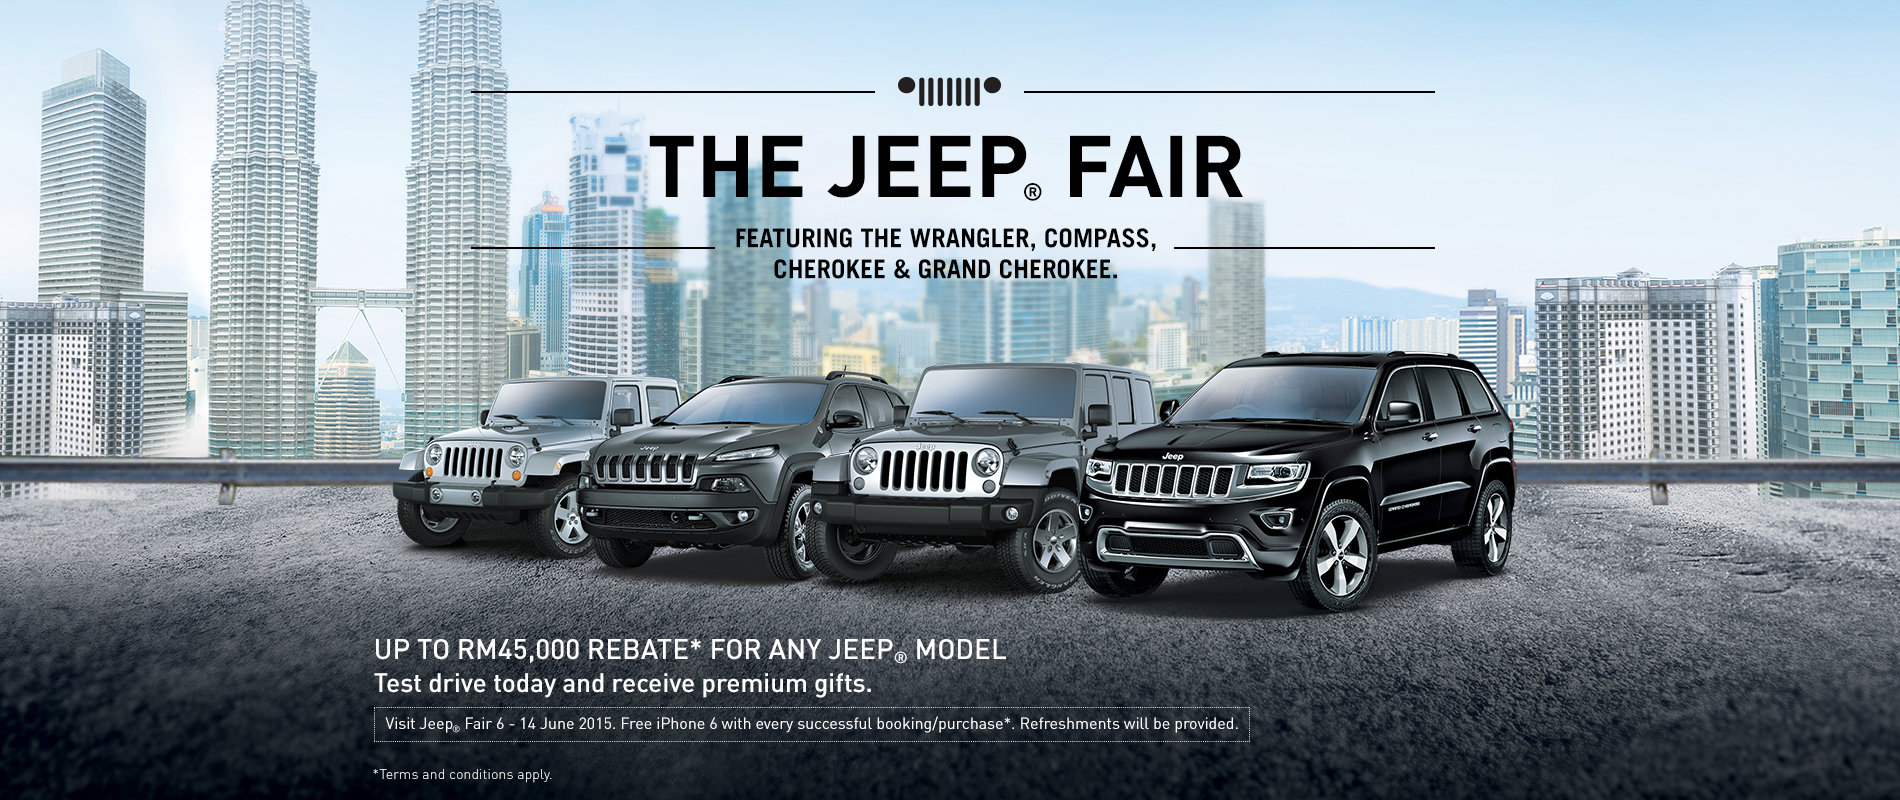 ad-get-up-to-rm45-000-rebate-at-the-jeep-fair-2015-jeep-fair-2015